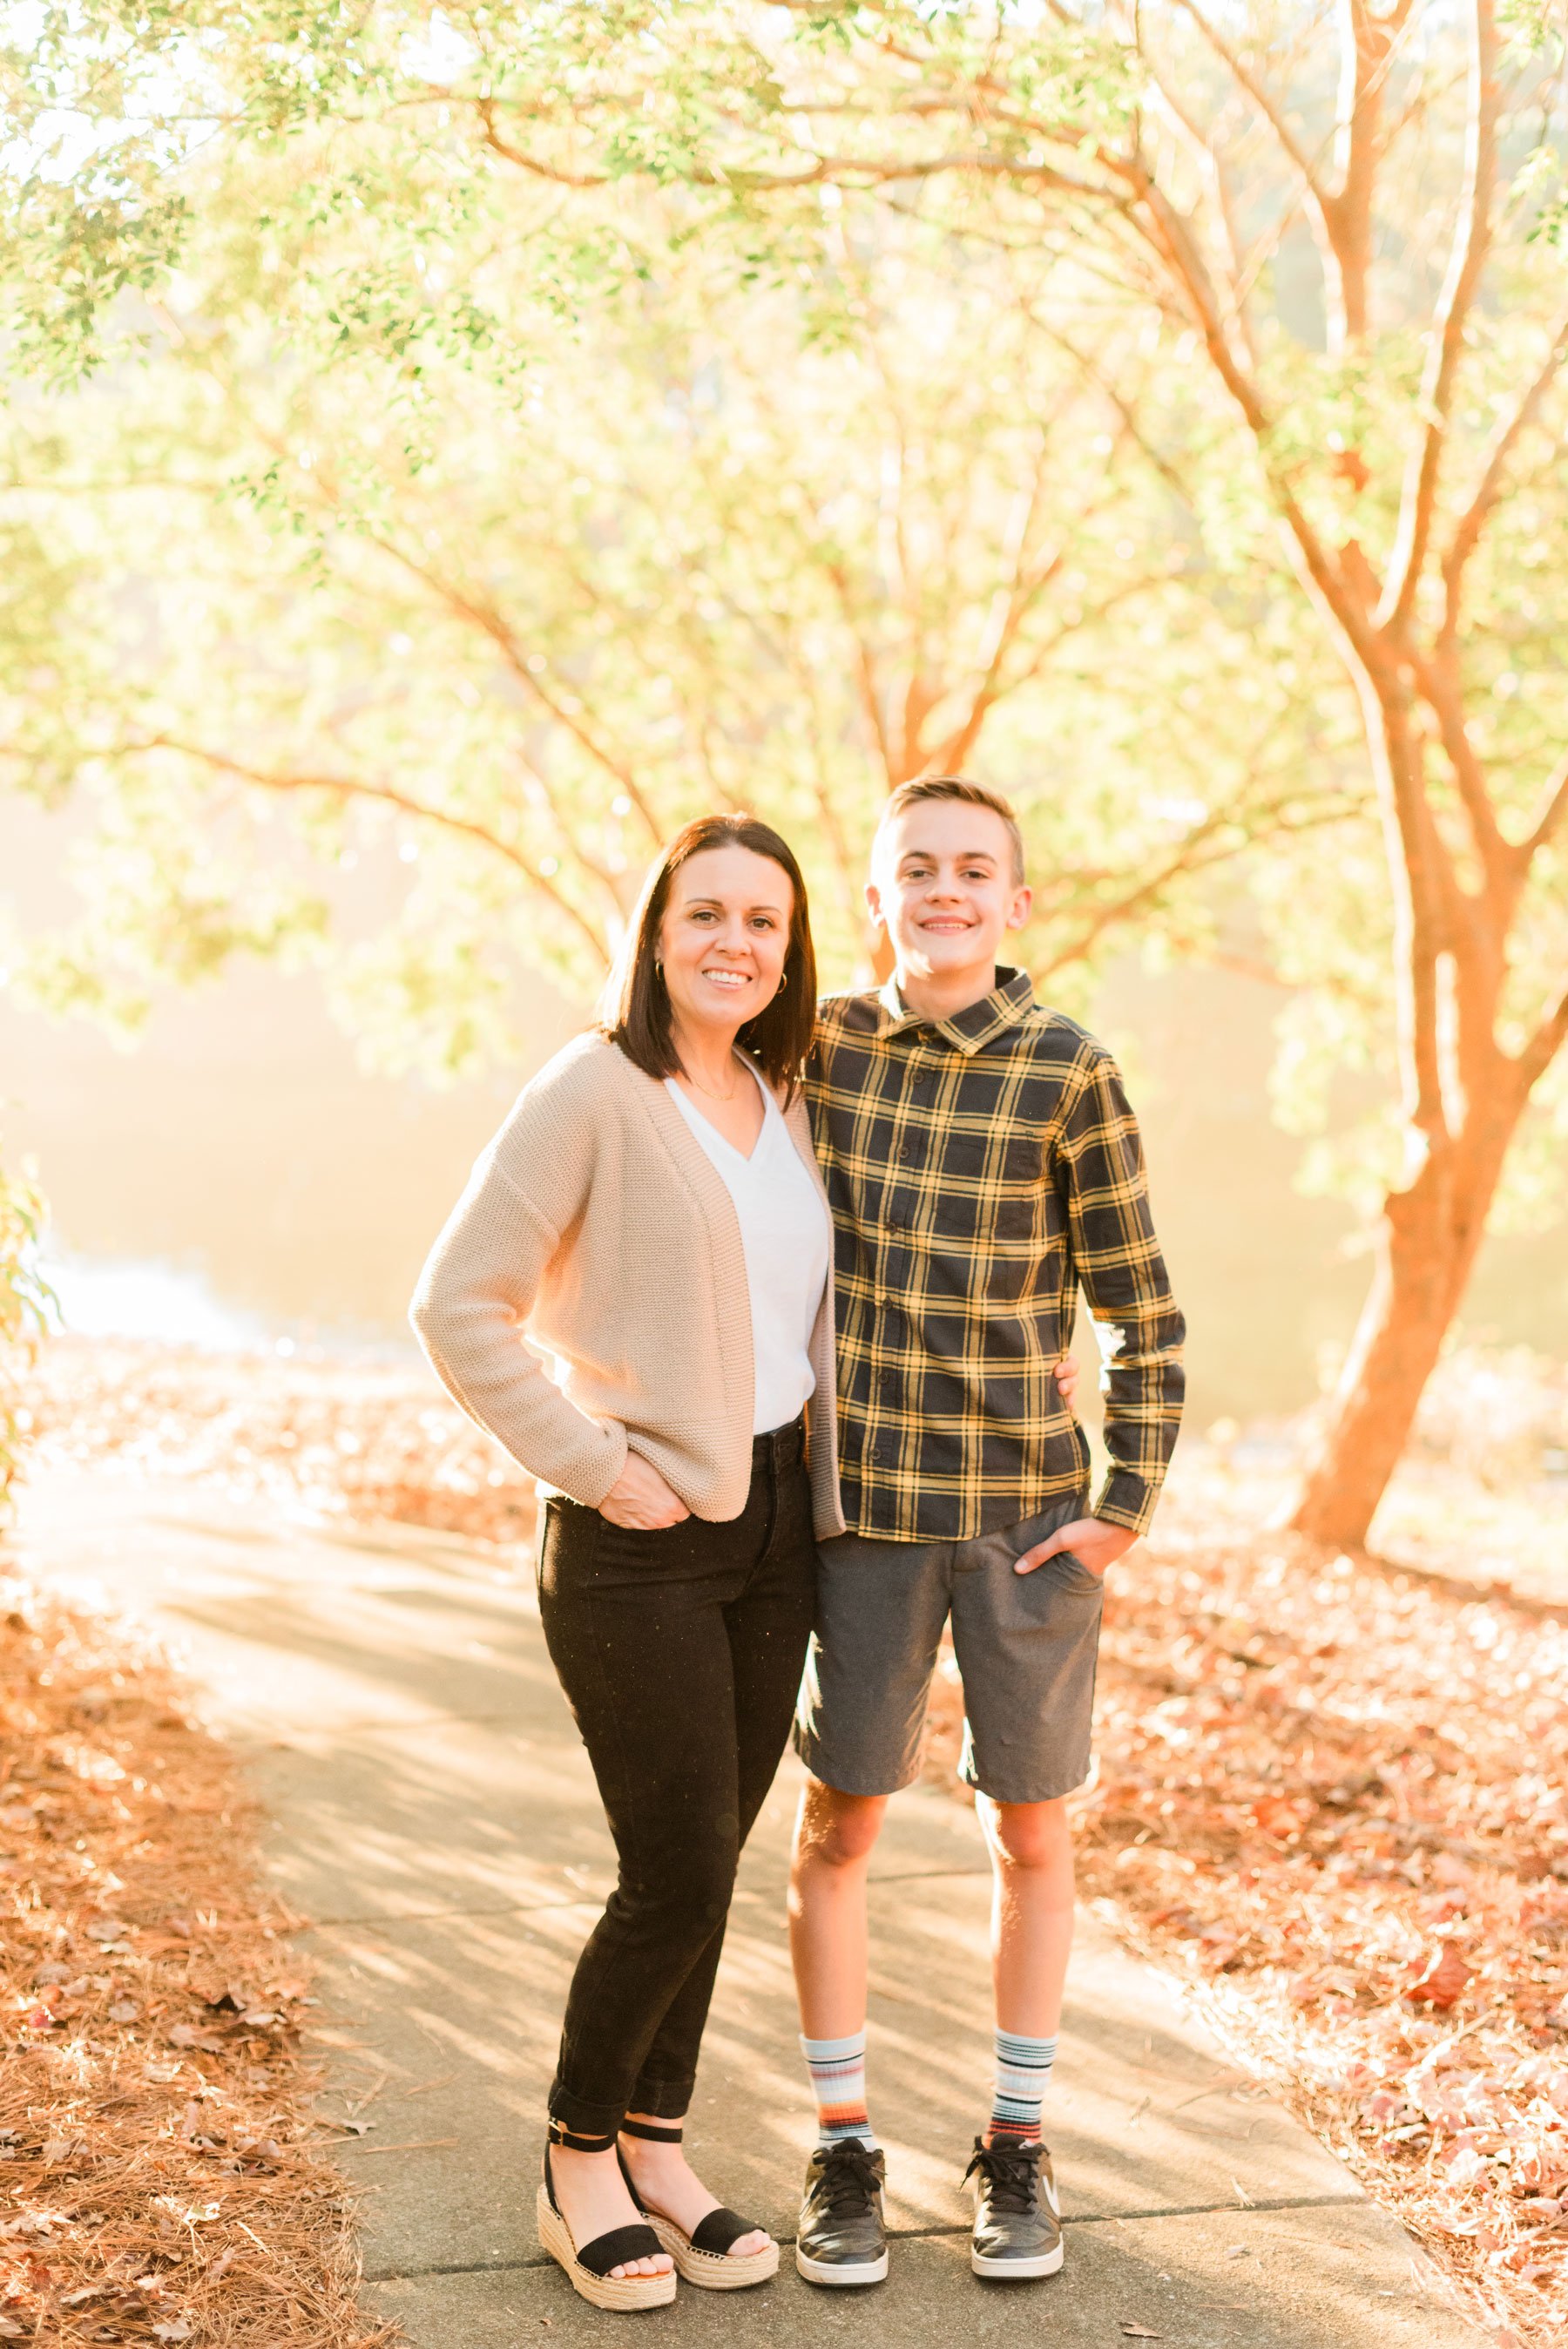  Next time you gather for a photo session, remember that we don’t just want proof that Mom was here. We want a fun-filled, laugh-filled photo session that captures the way mom interacts with you each day. #JacquieEricksonPhotography #MoreThanProofOfM